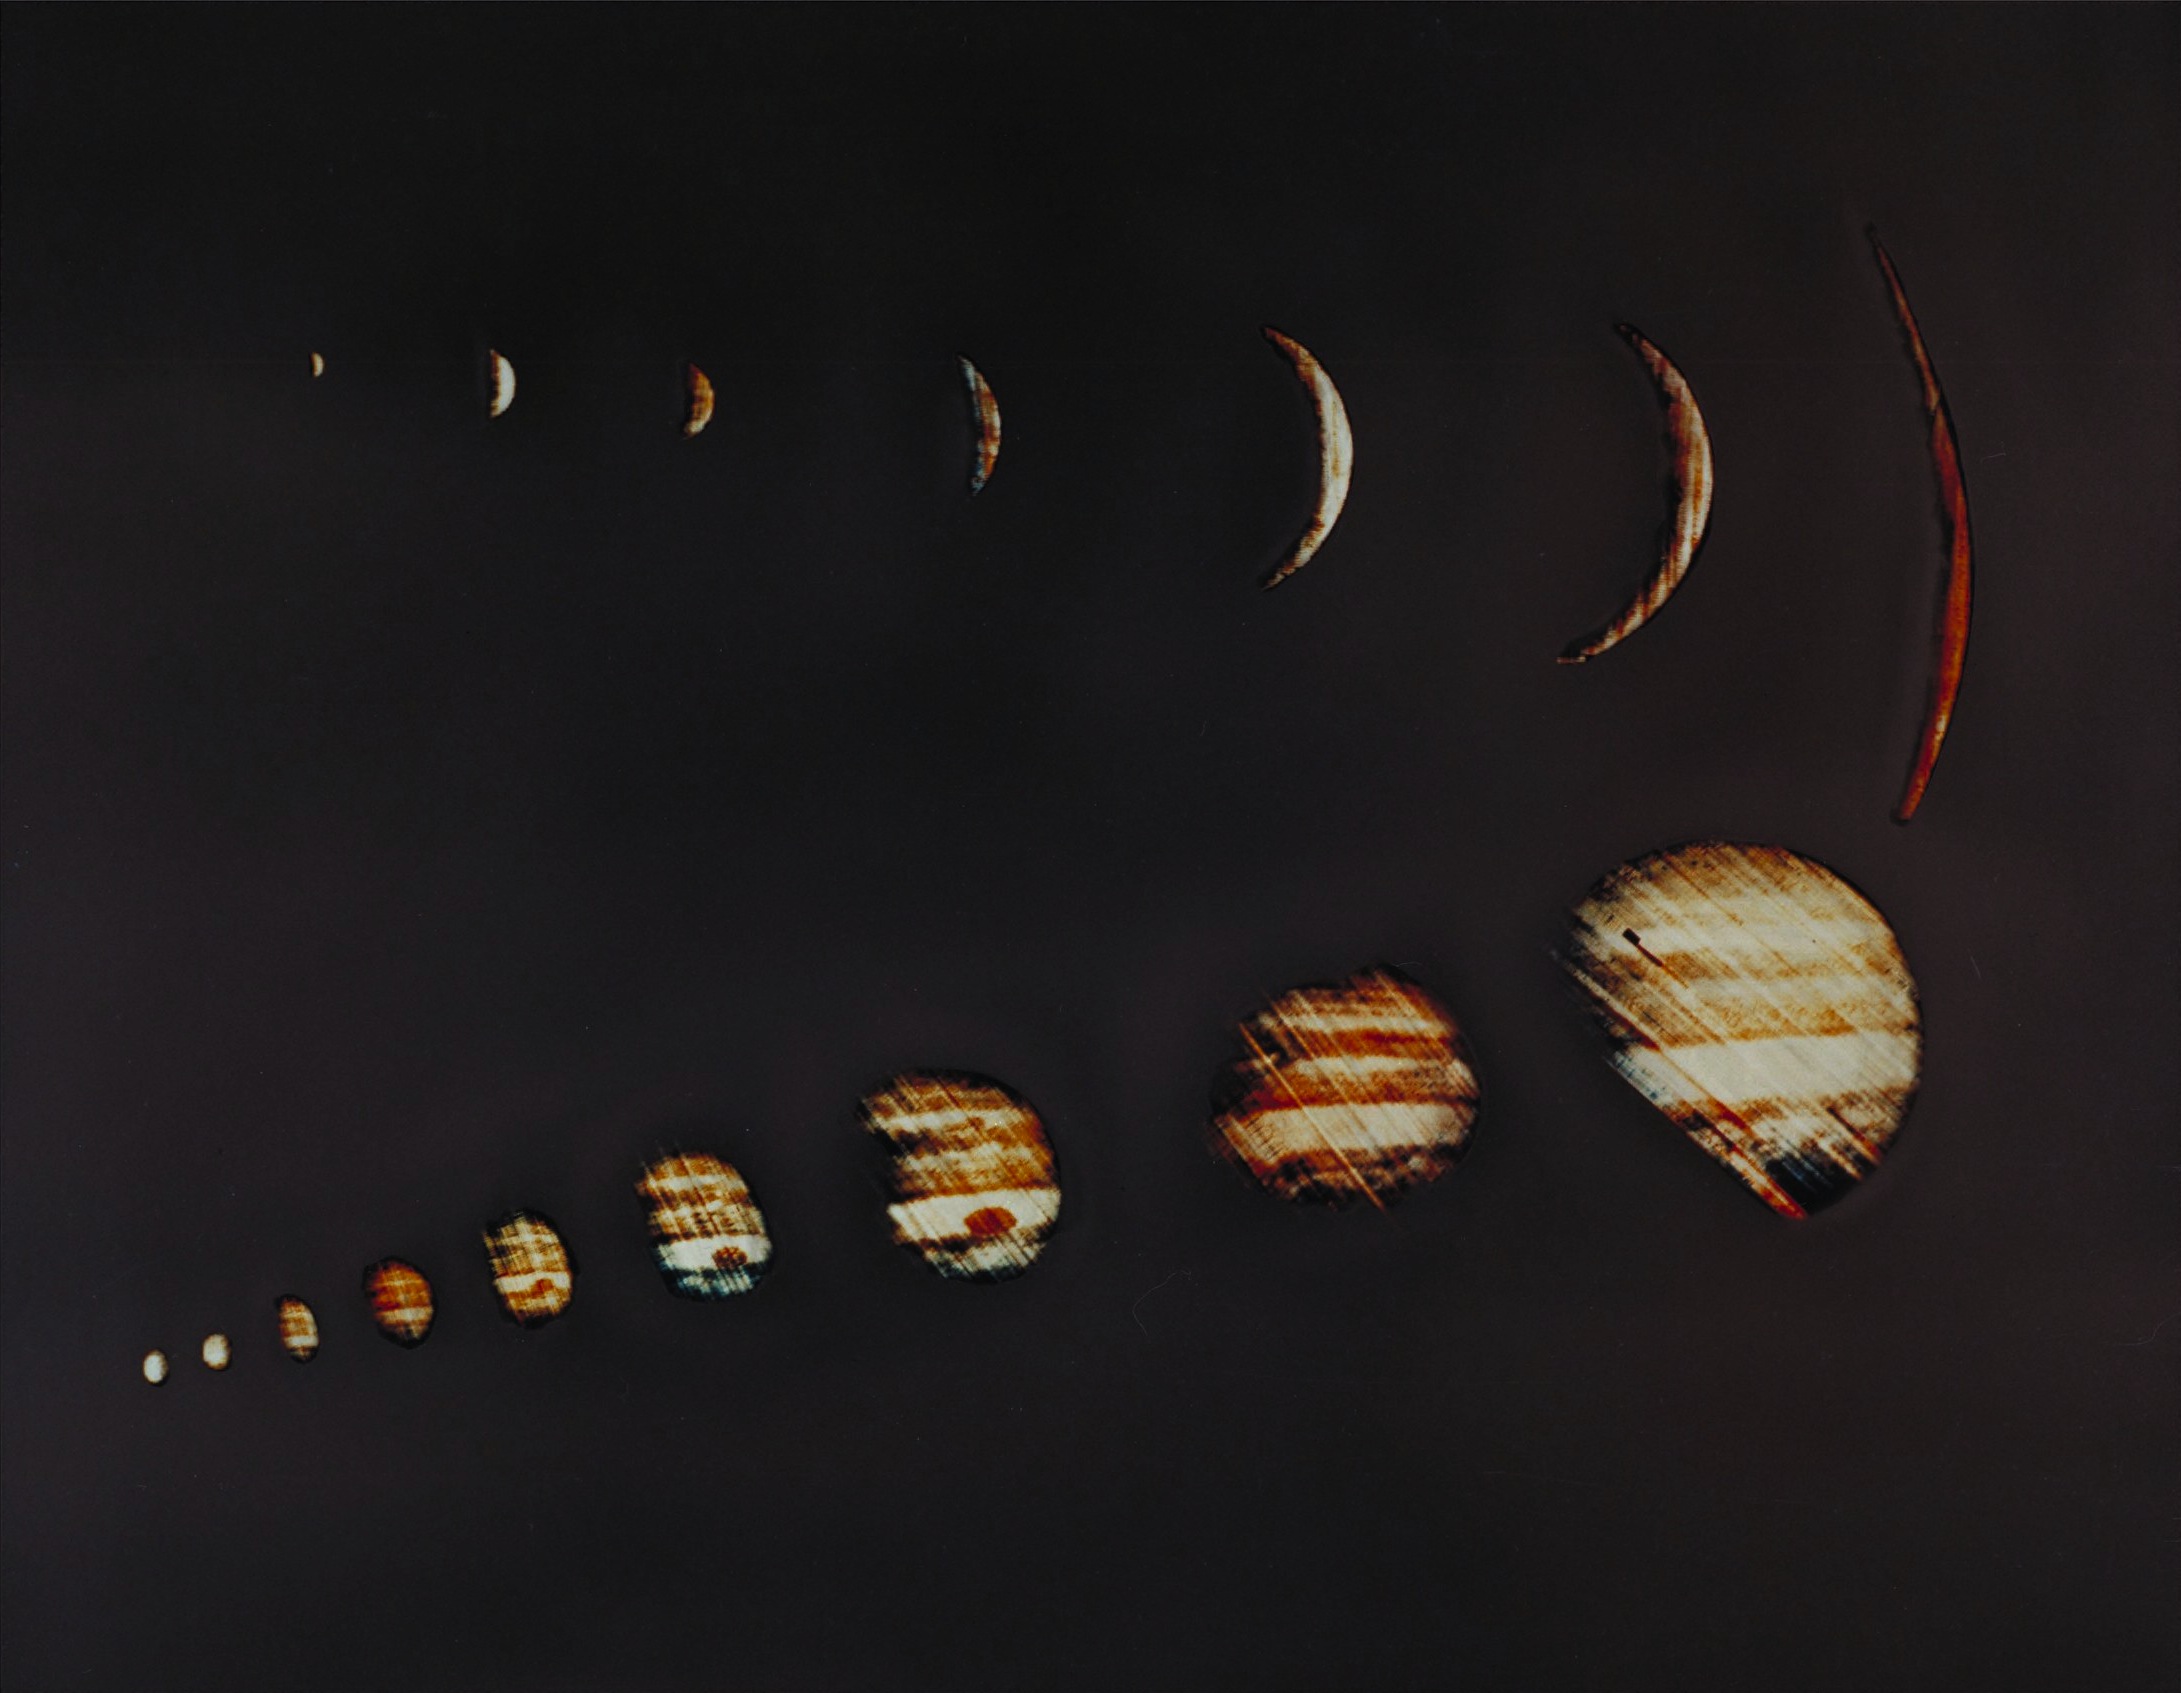 Images of Jupiter of ever-increasing size. These pictures were taken when the spacecraft sped away out of the Jovian system